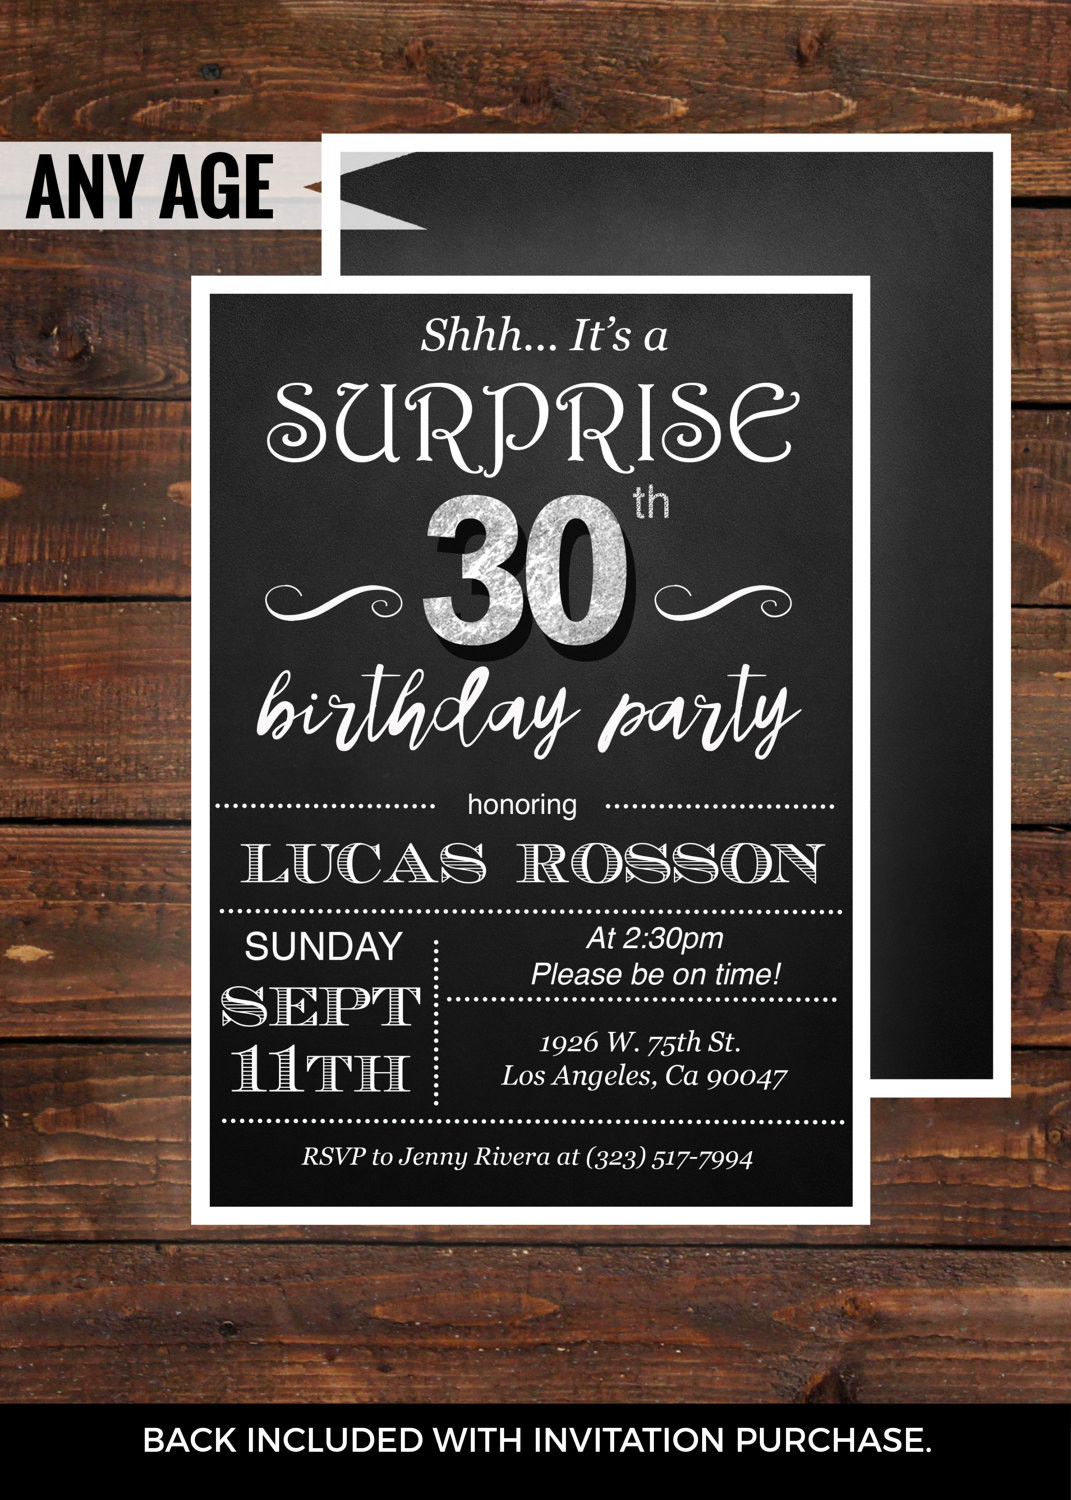 Surprise 30th Birthday Invitations
 Surprise 30th birthday invitations for him by